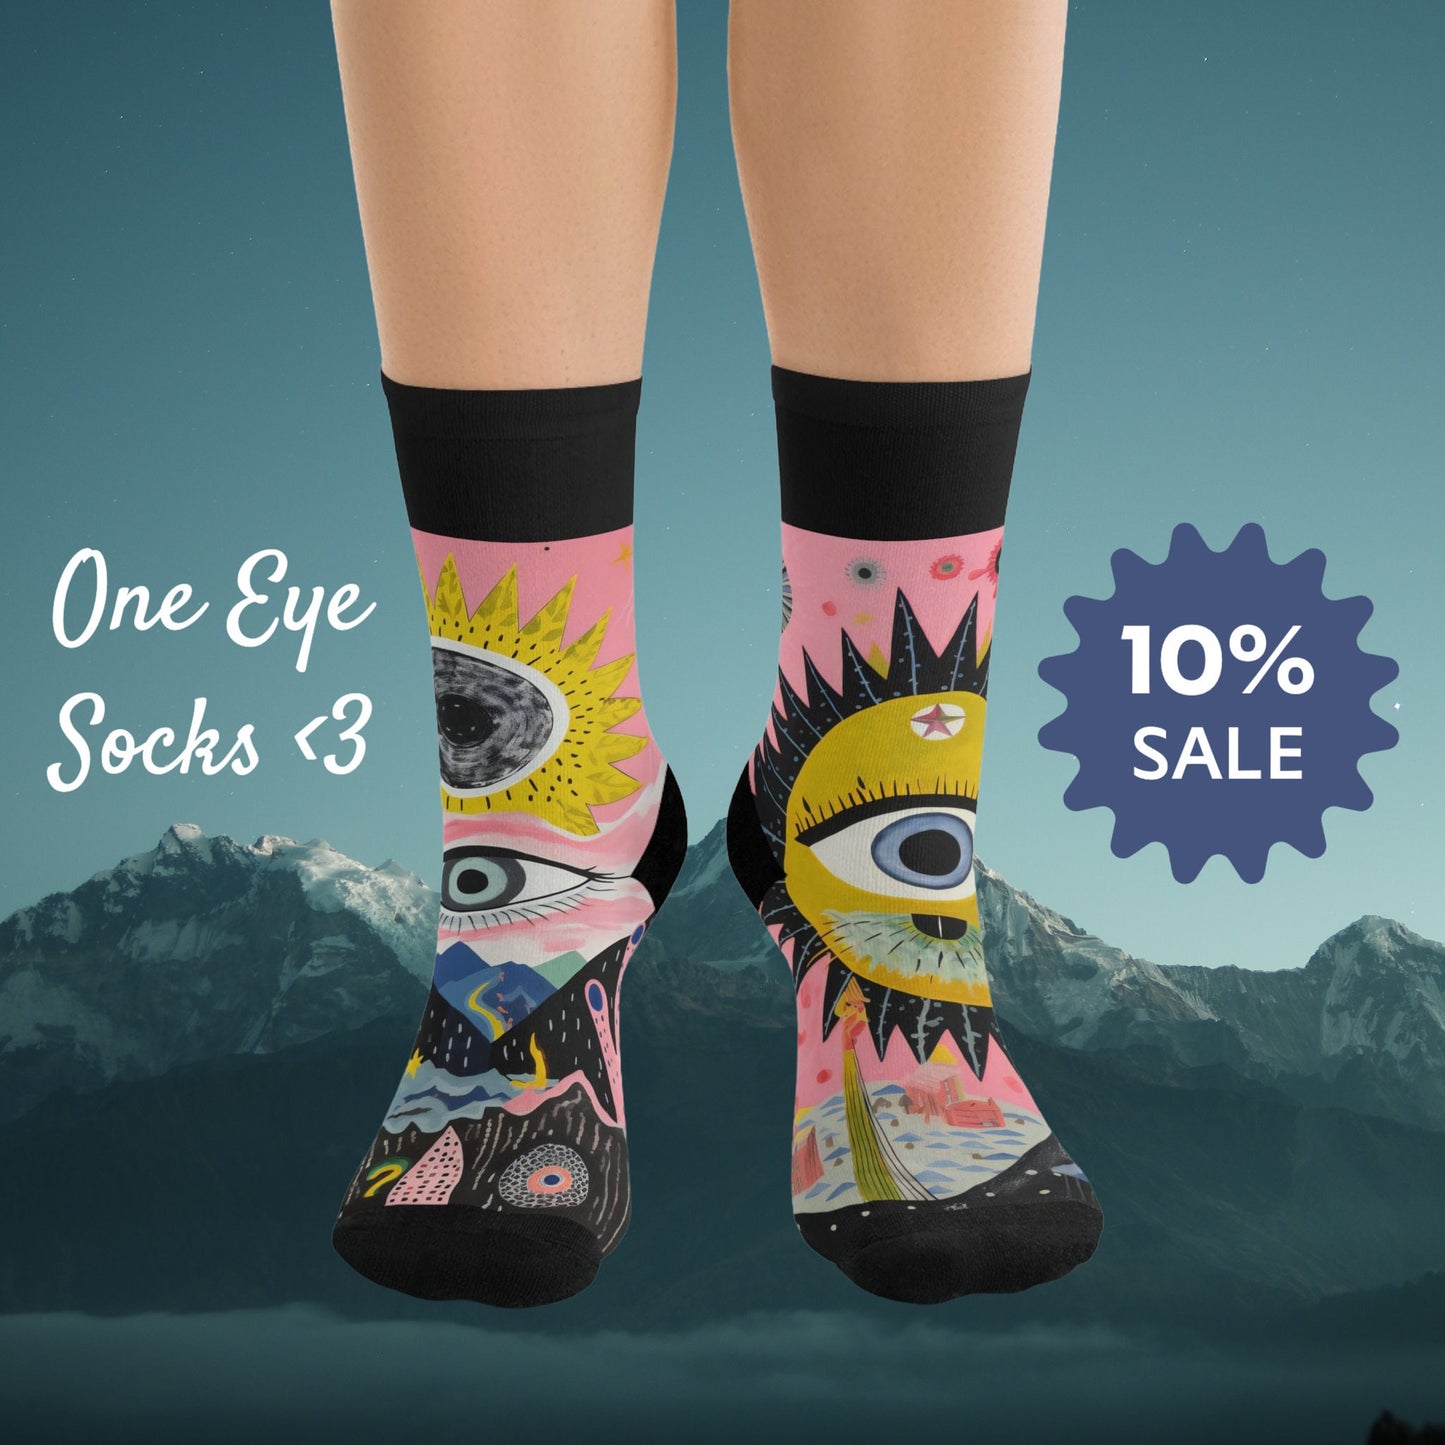 Psychedelic Art Socks • Recycled Poly Socks • One-Size-Fits-Most • Illumivers Art Socks • Outdoor Socks • Christmas Socks • Cute Winter Gift